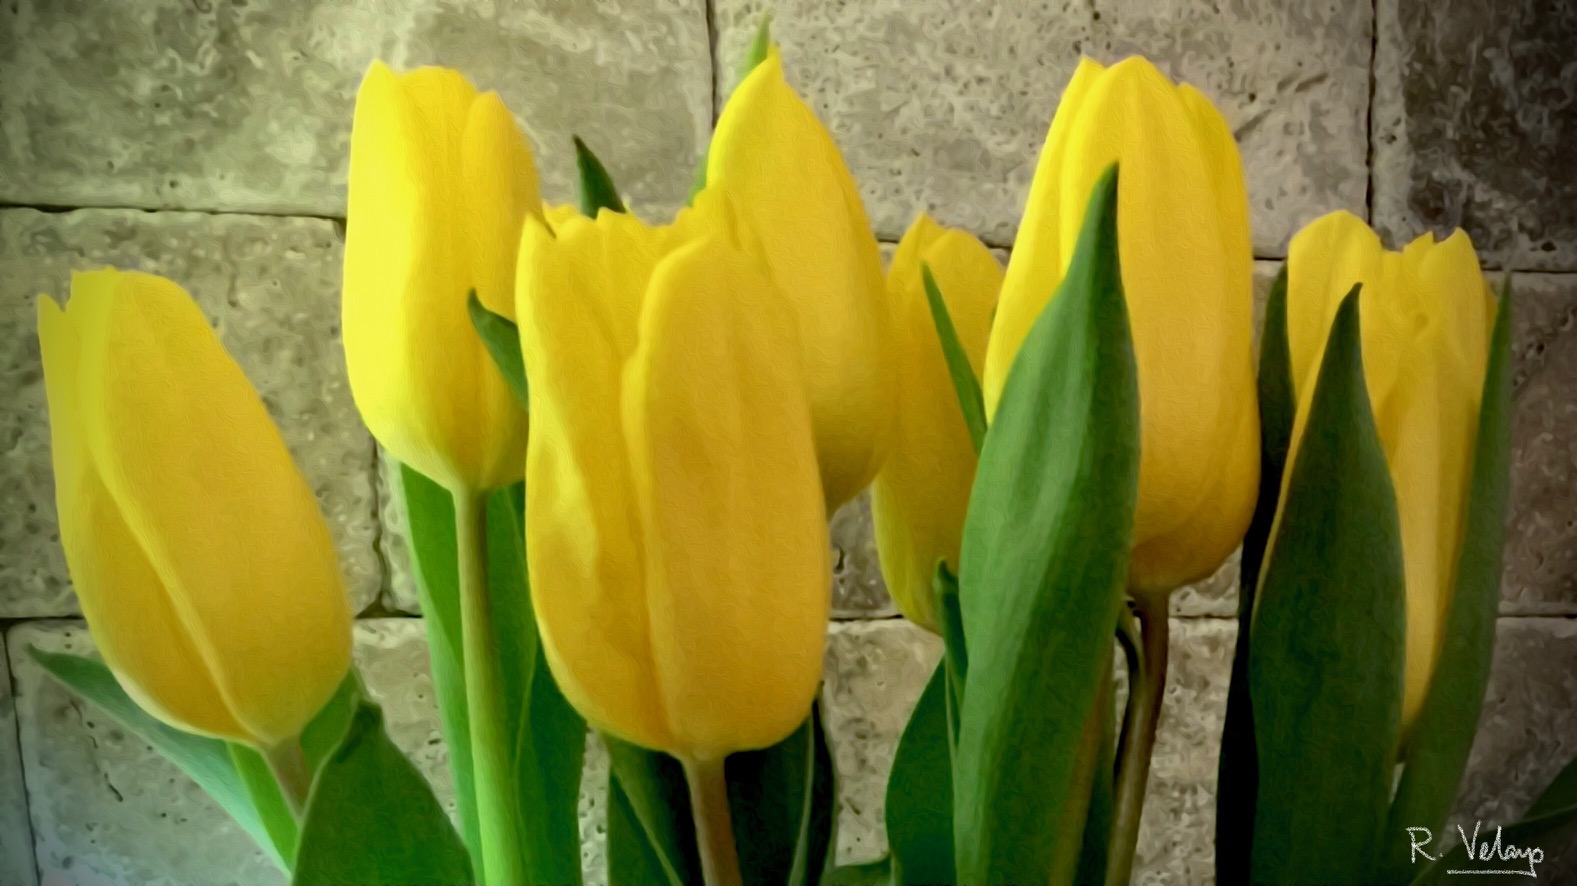 "BOUQUET OF YELLOW TULIPS" [Created: 11/12/2021]